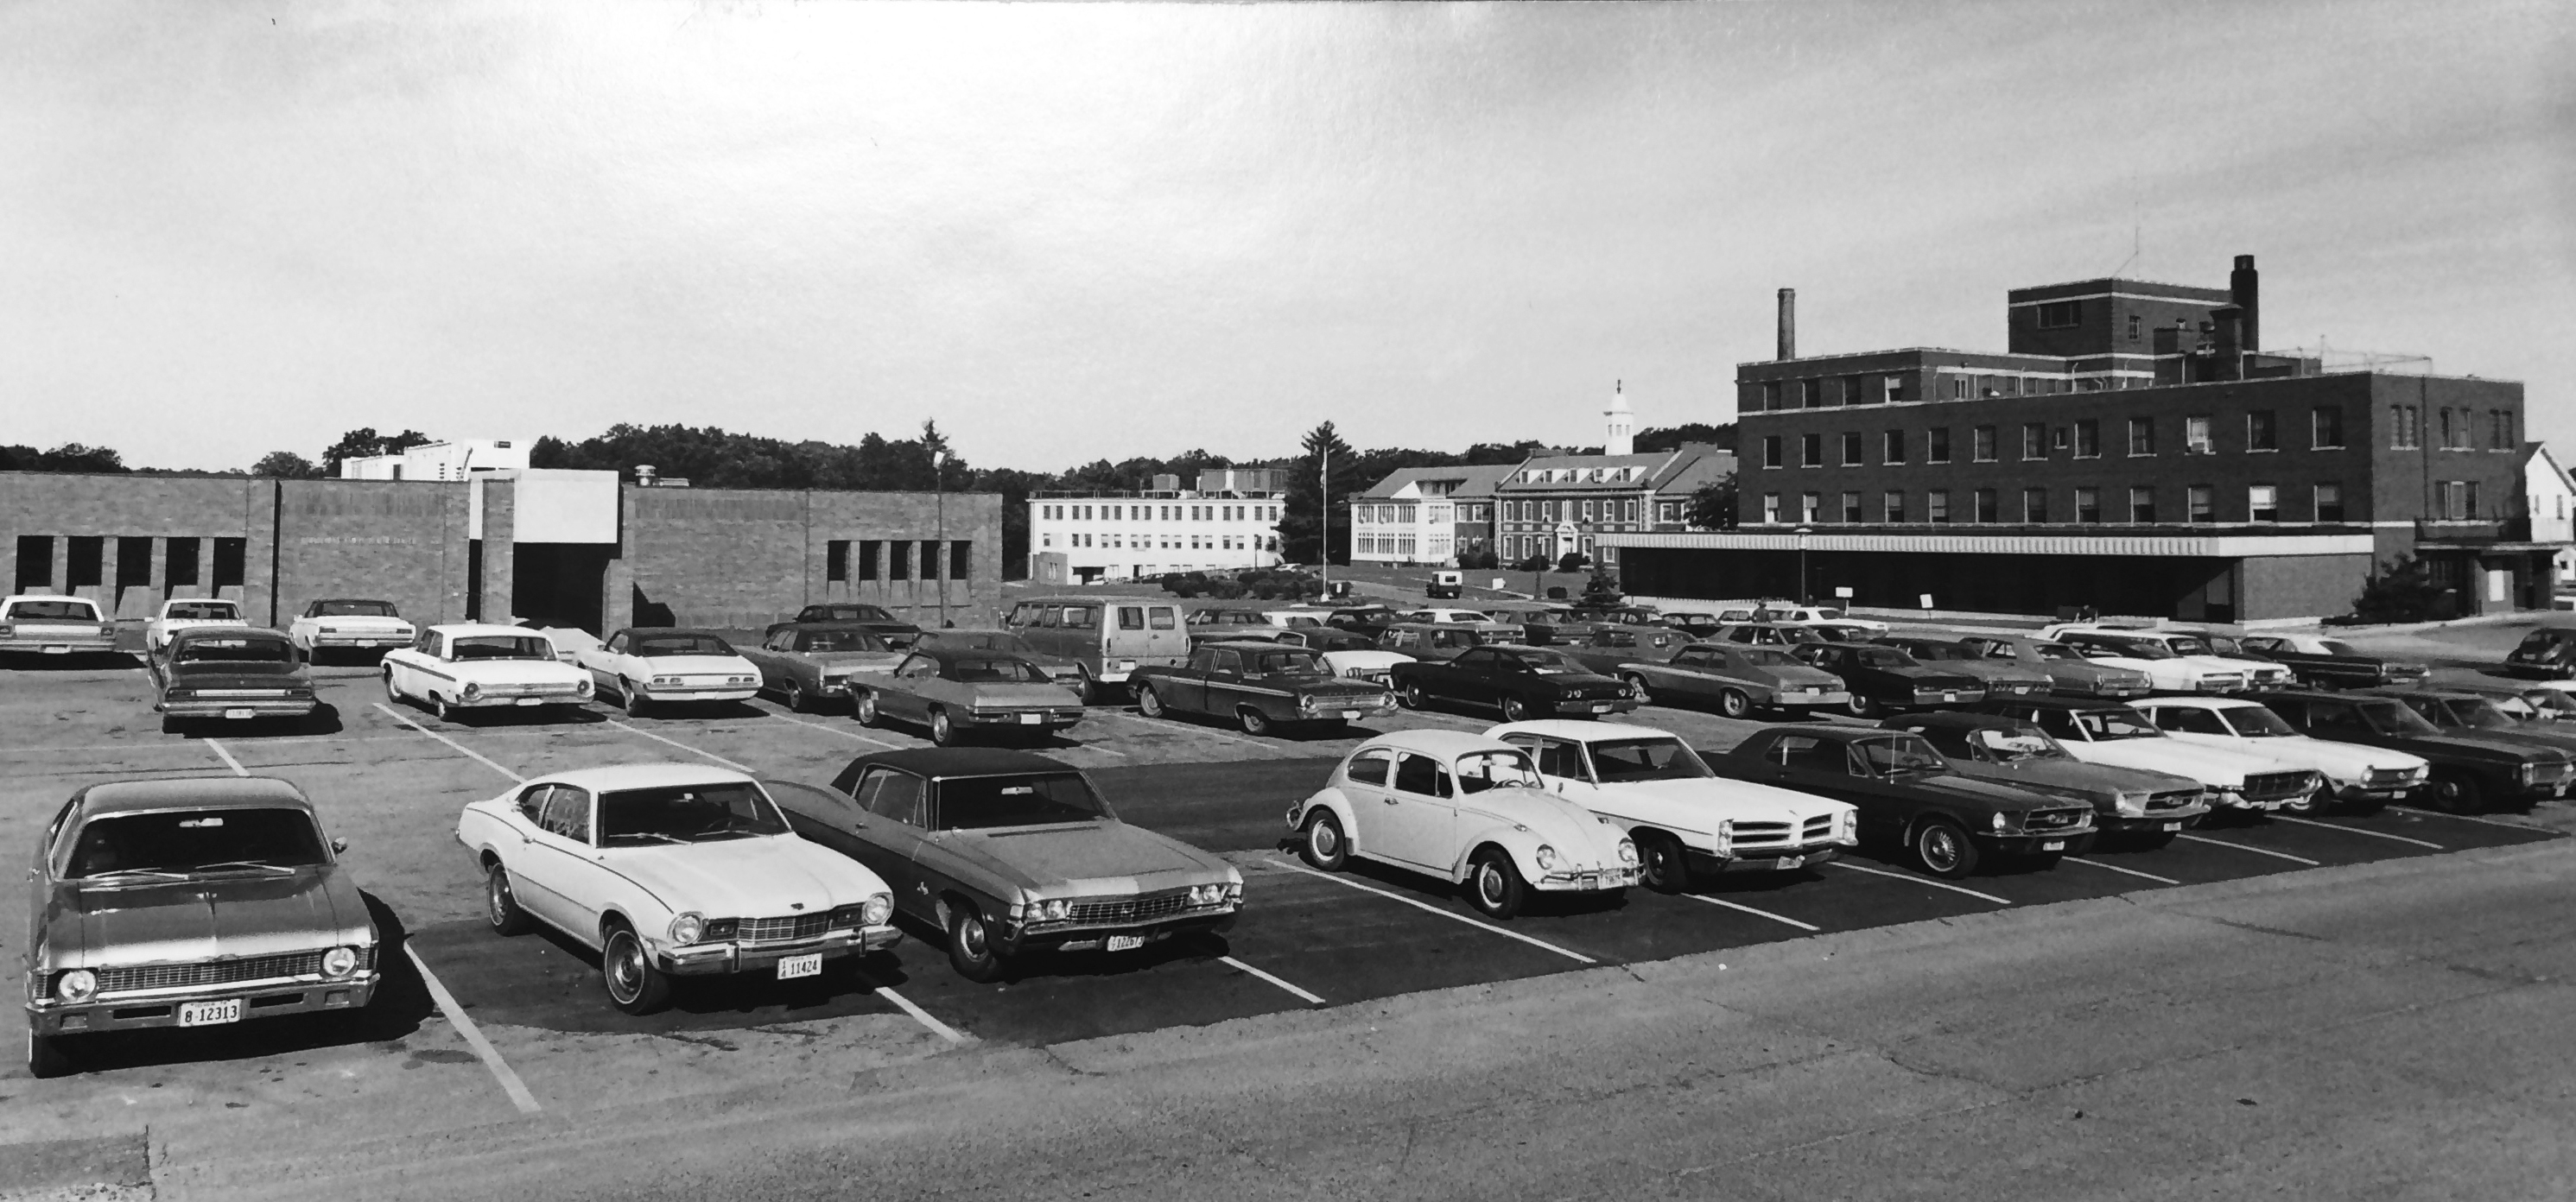 Broadlawns Family Health Center 1970 with time period cars